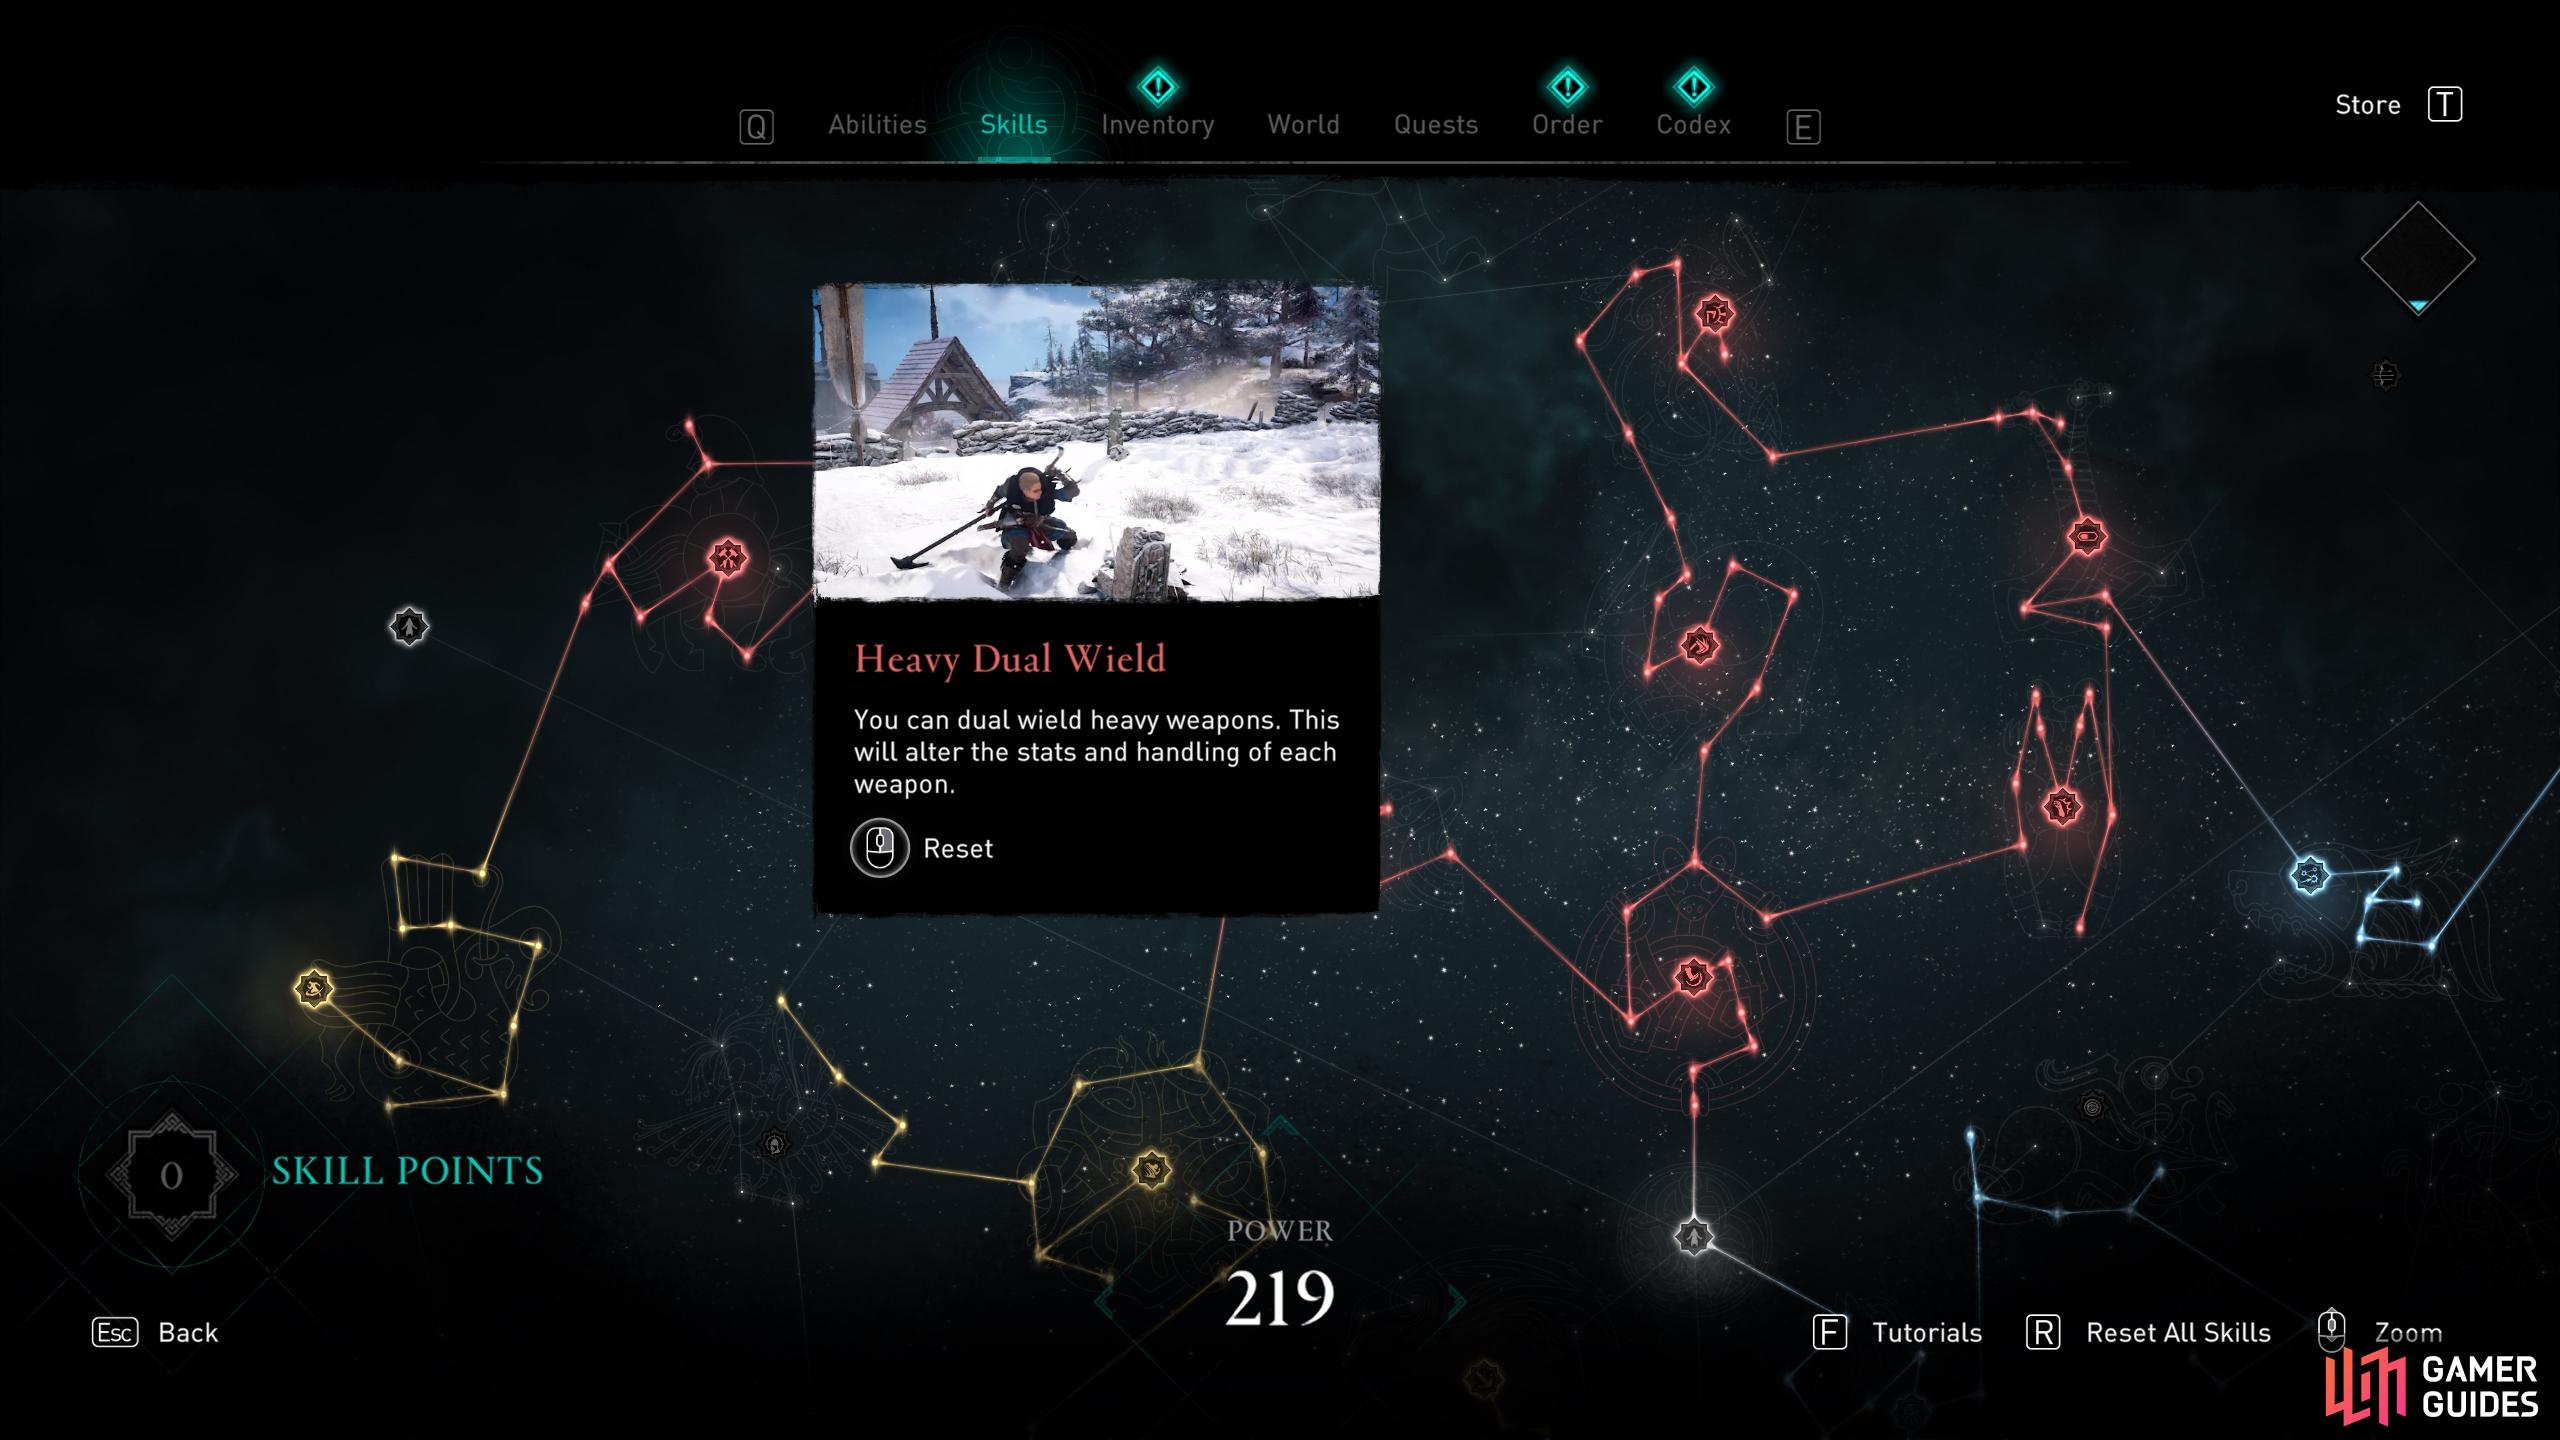 You'll find the Heavy Dual Wield skill in the Way of the Bear skill tree.